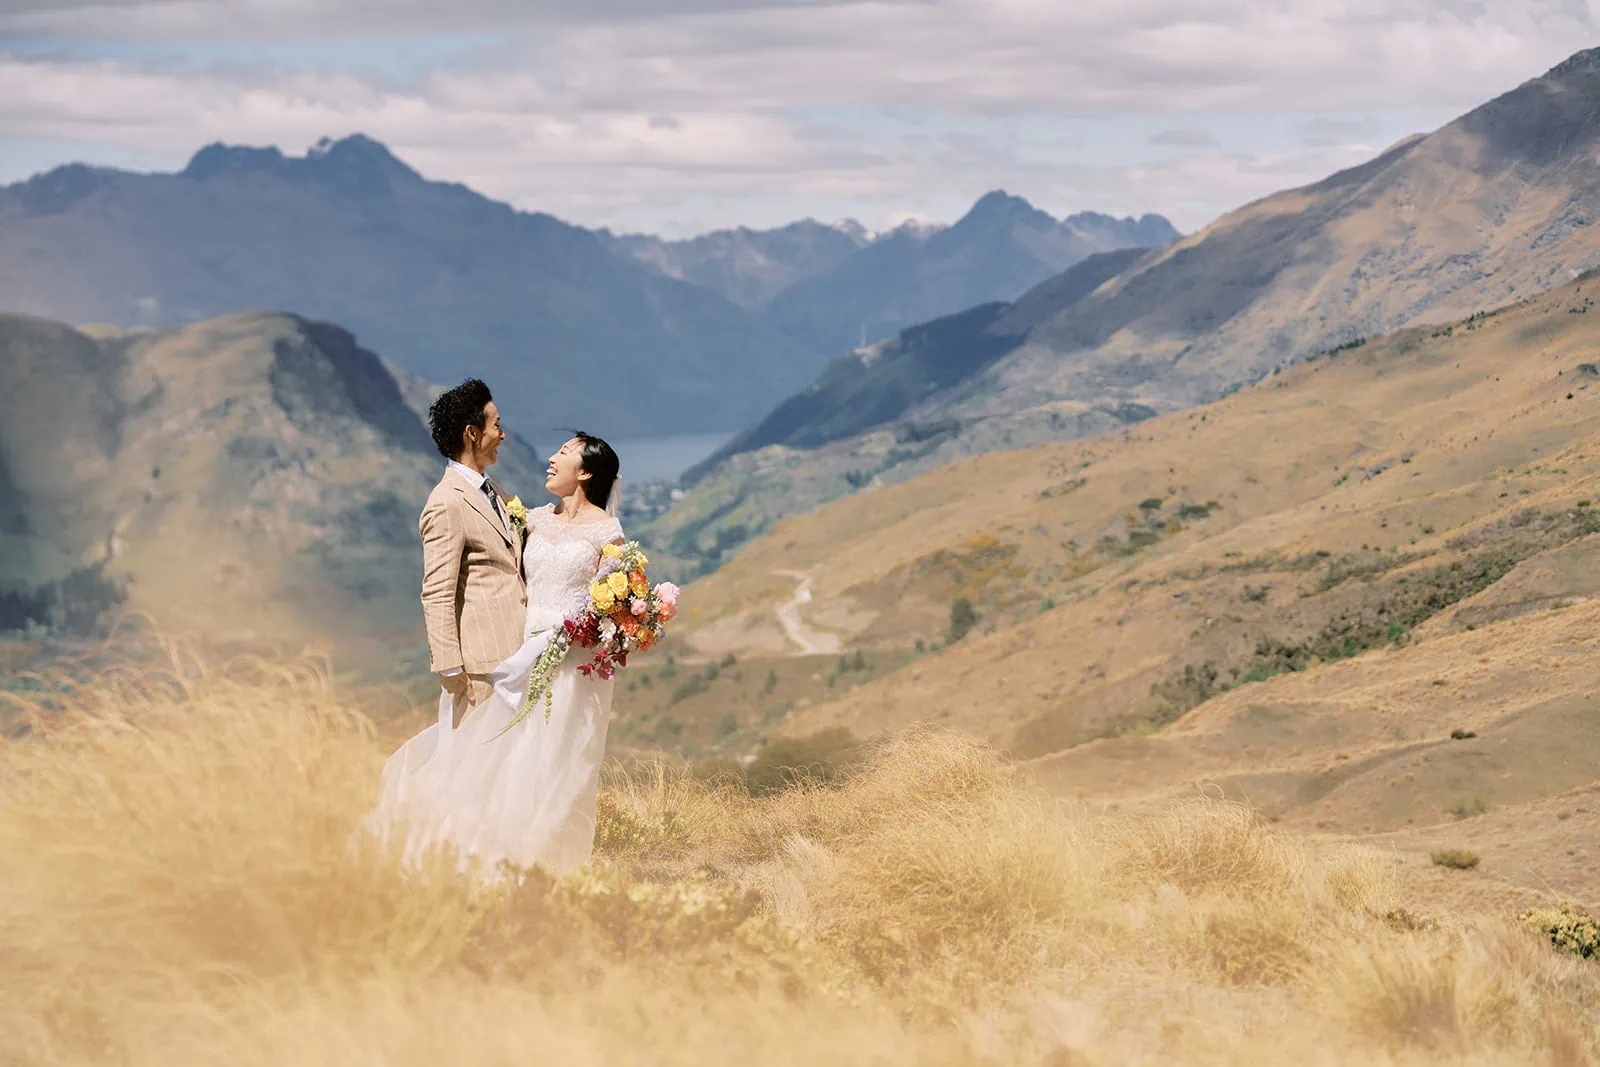 Queenstown Elopement Heli Wedding Photographer クイーンズタウン結婚式 | Saki and Taisei enjoying a Queenstown Heli Pre-Wedding Photoshoot, standing on top of a hill in the mountains.